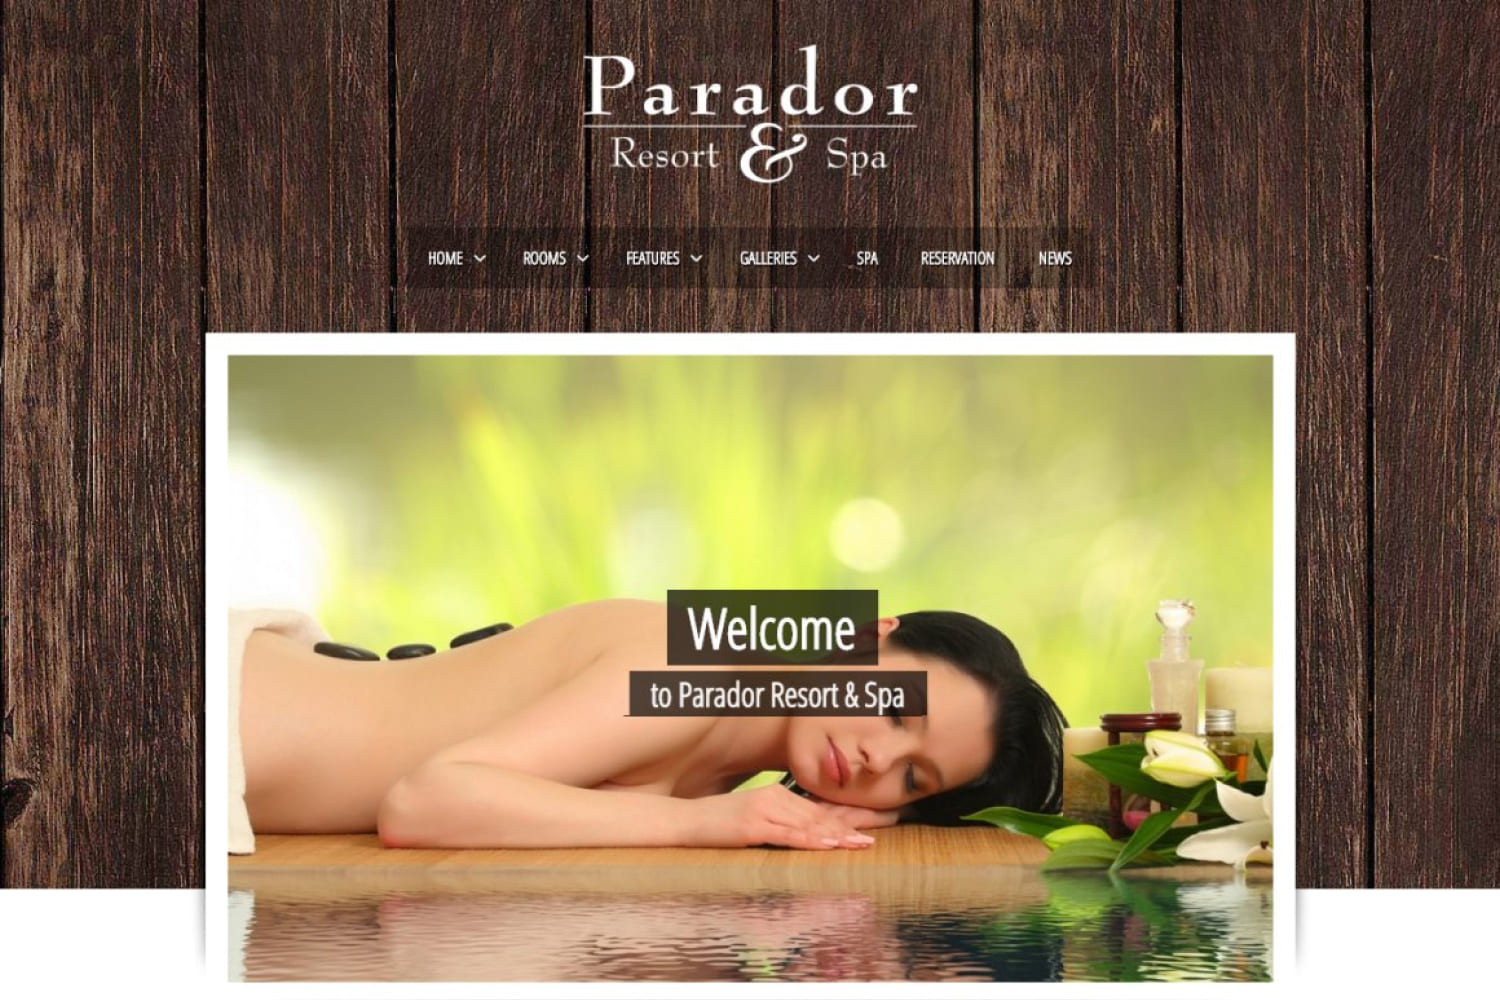 Home page of the hotel website with a photo of a girl in a spa.